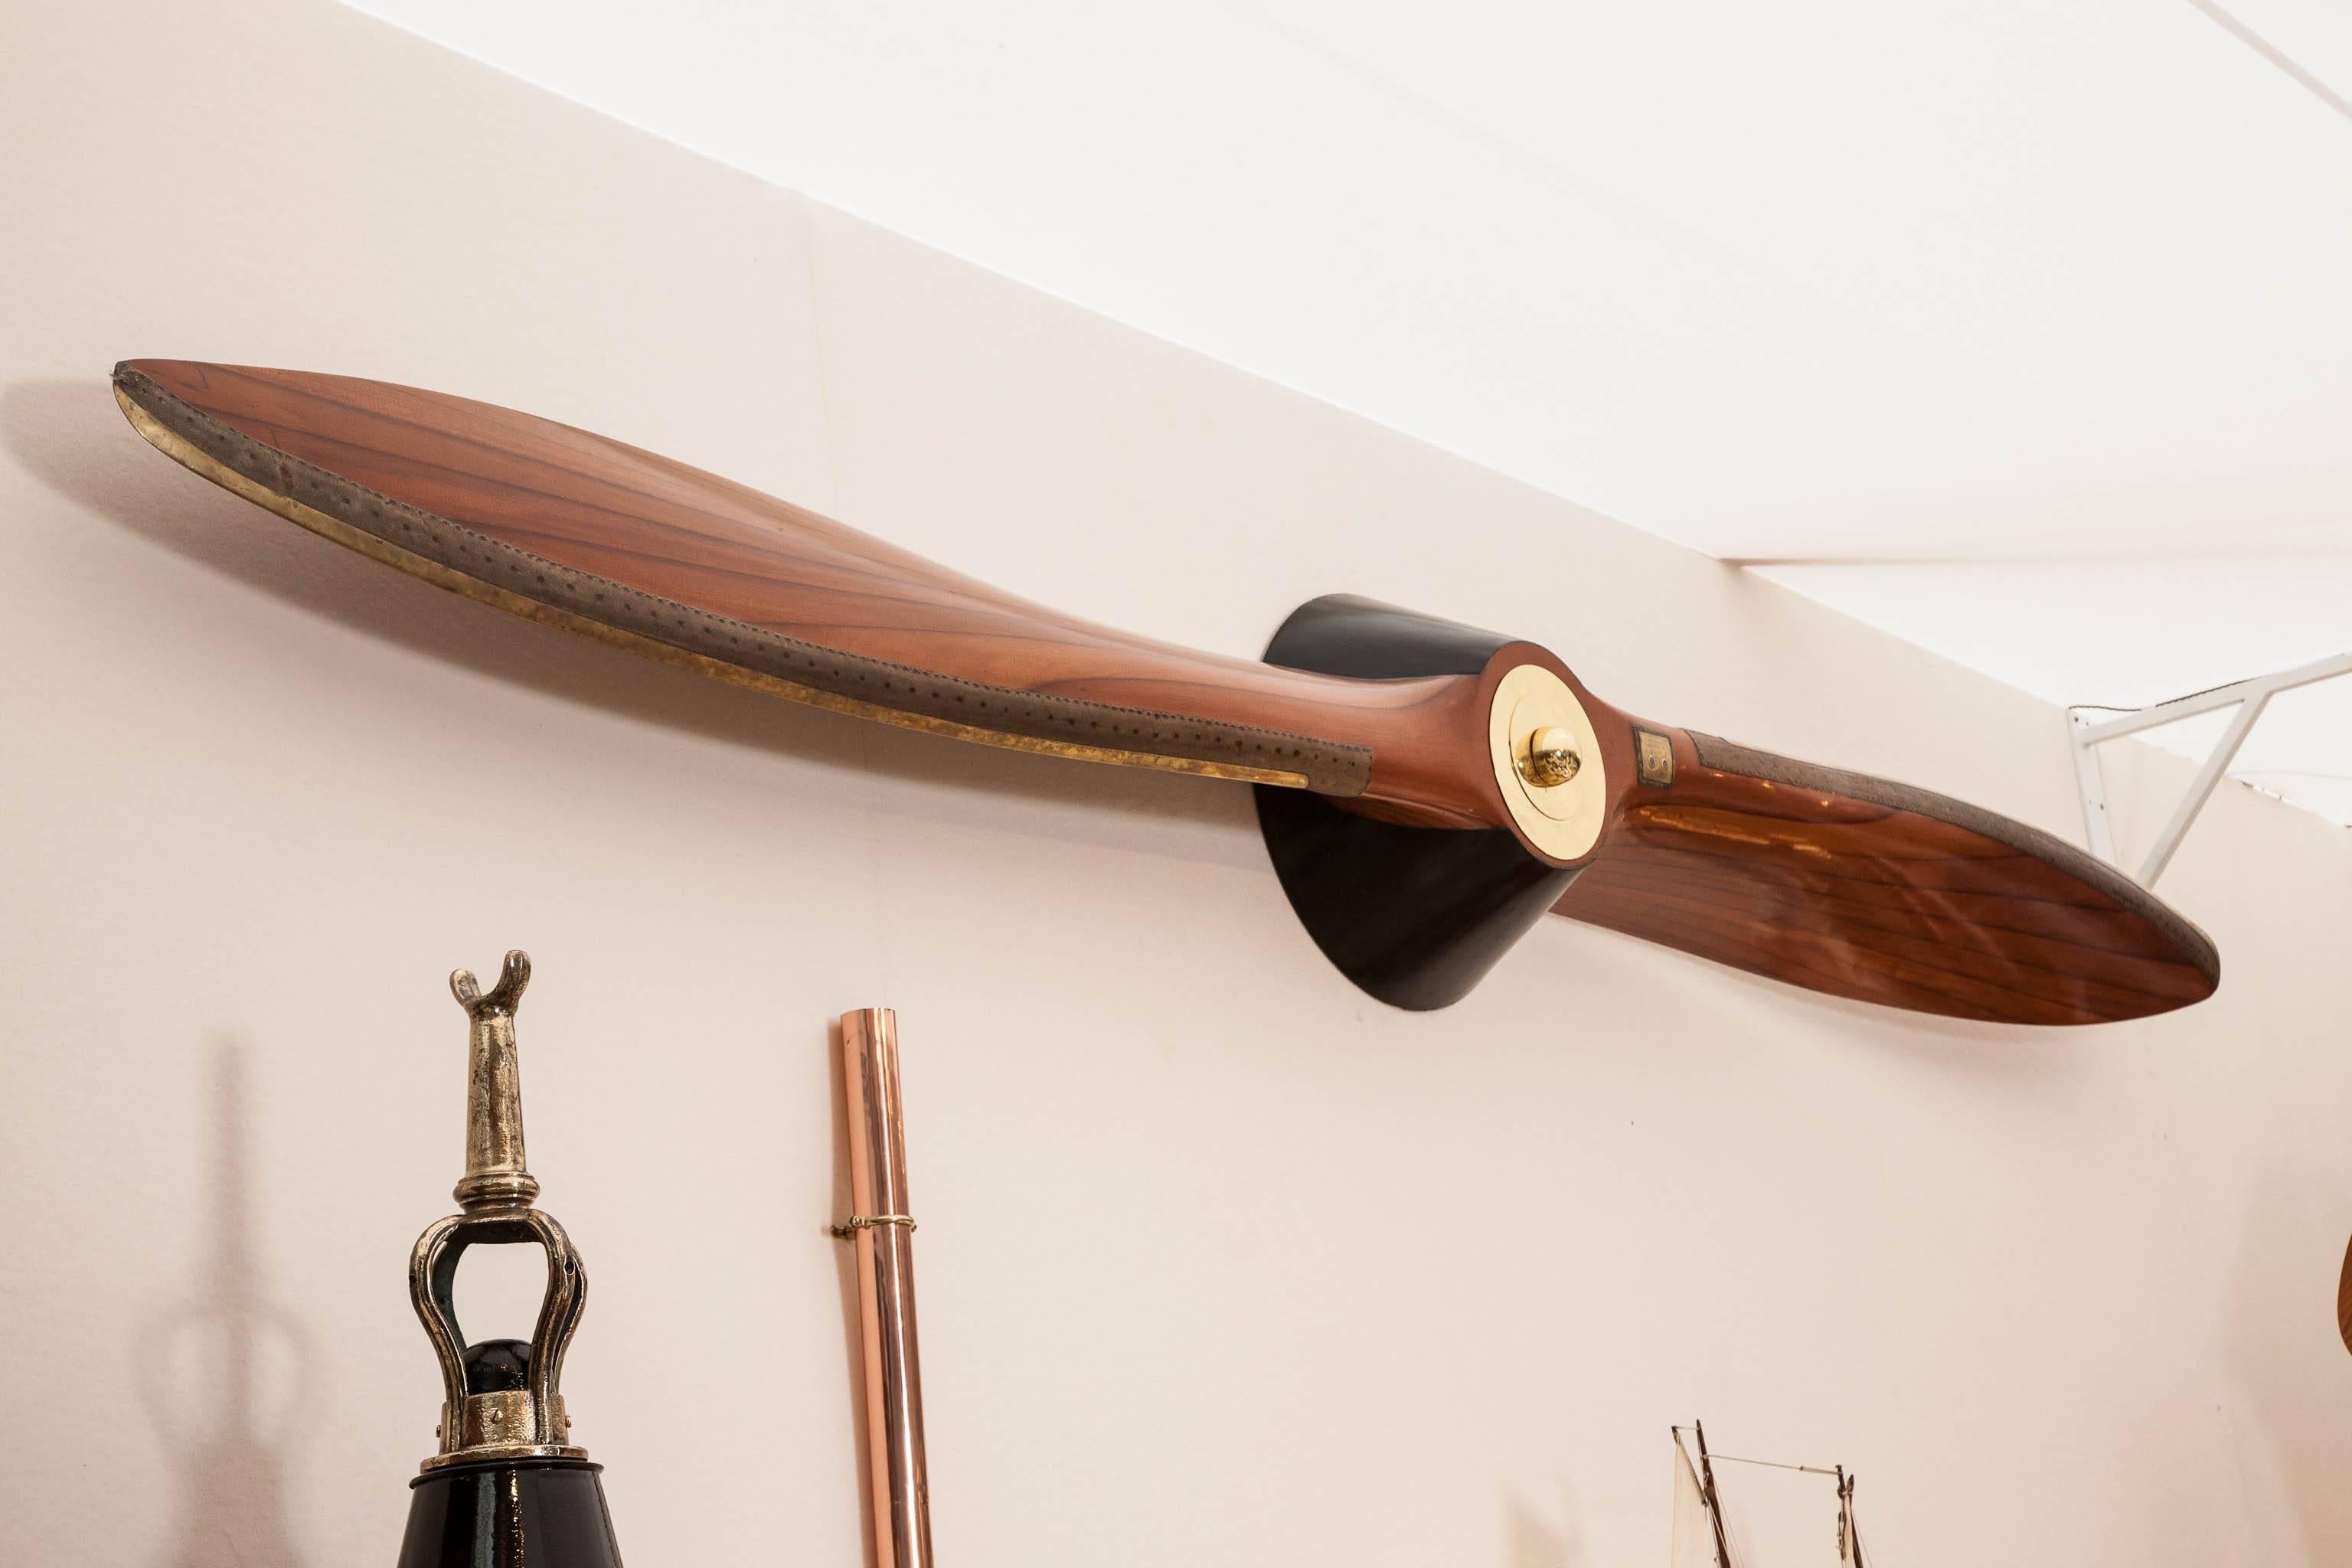 A 1930s laminated mahogany propeller from a Hawker Hart powered by a Rolls Royce Kestrel V12, dated September 1936.

With wall-mounted bracket.

Label reads: DRG NO S 19C 11003/E KESTRAL IX D.12.5 P.11.2 C4086 44933 SEP 1936

The Hawker Hart